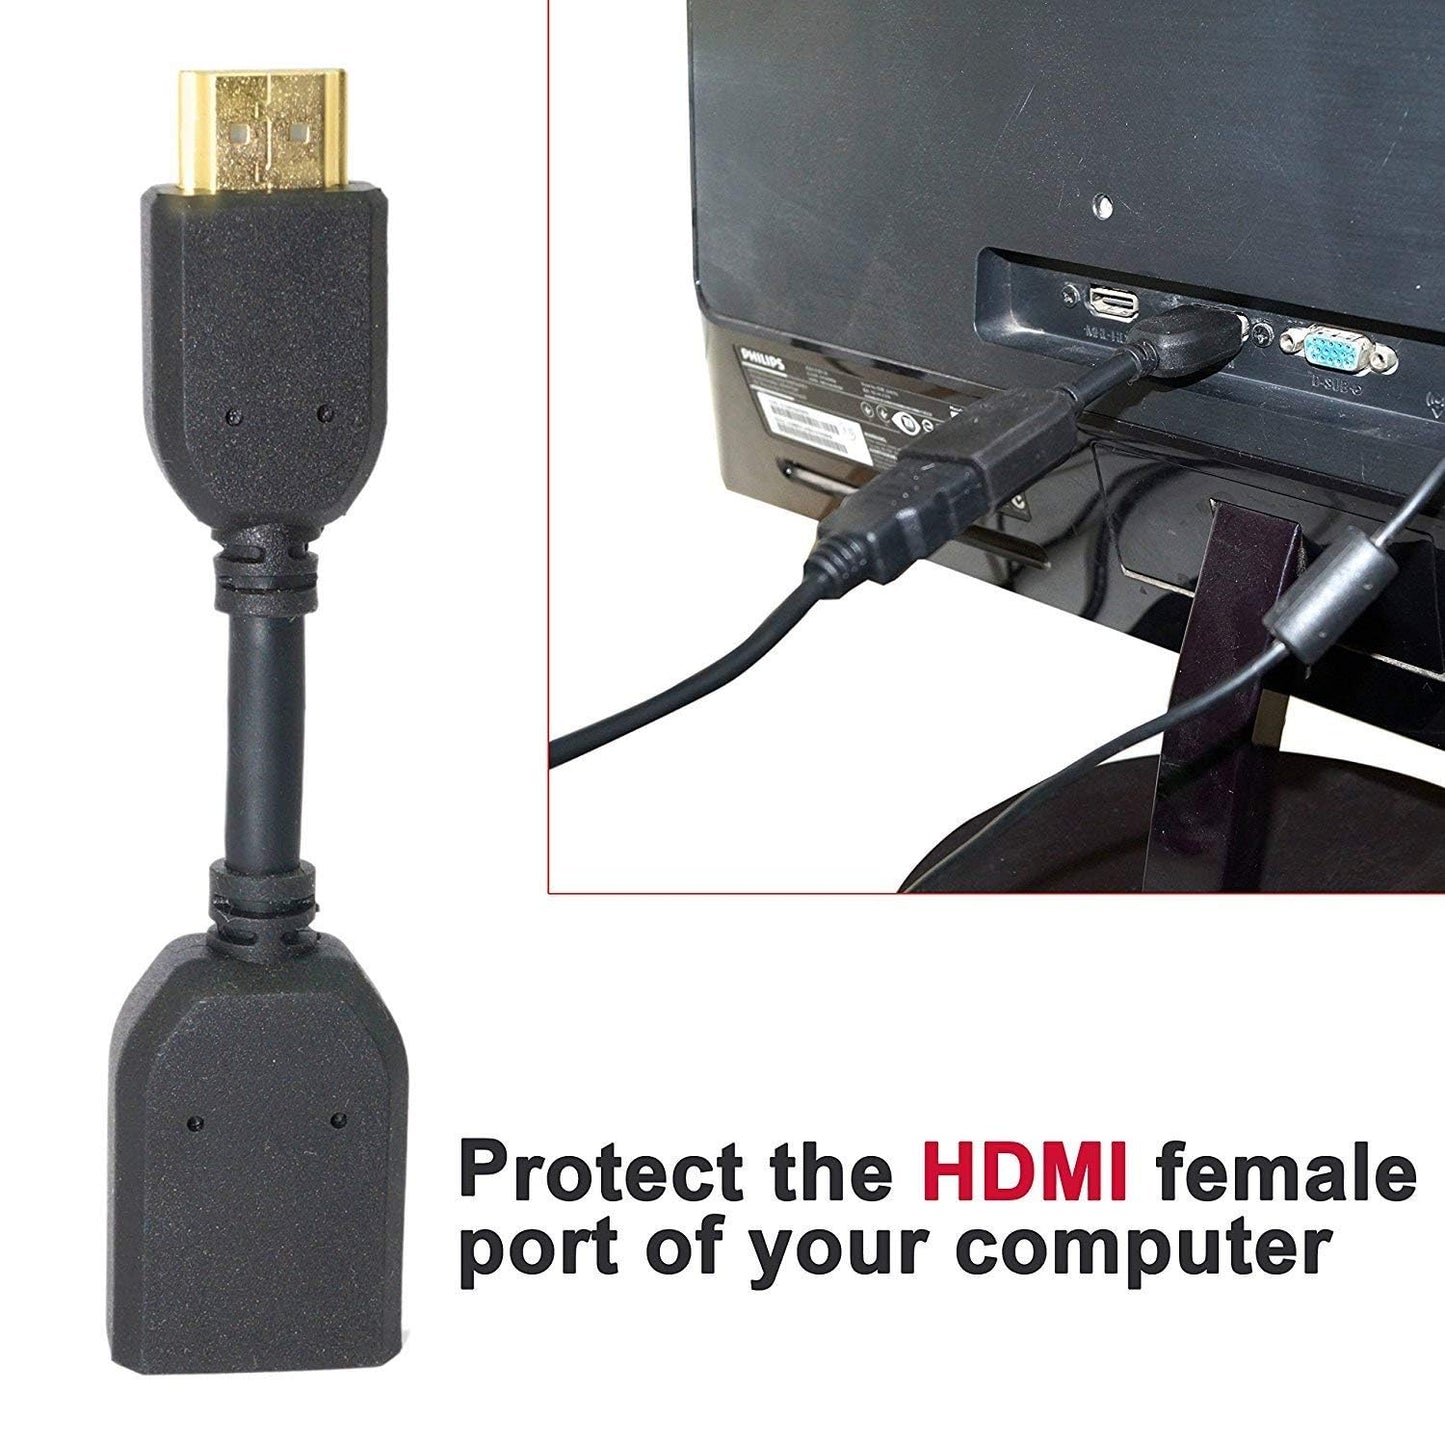 EYUVAA HDMI Male to Female Extension Cable Adapter for Computer, Desktop, Laptop, PC, Monitor, Projector, HDTV, Chromebook, Xbox and More (Black)